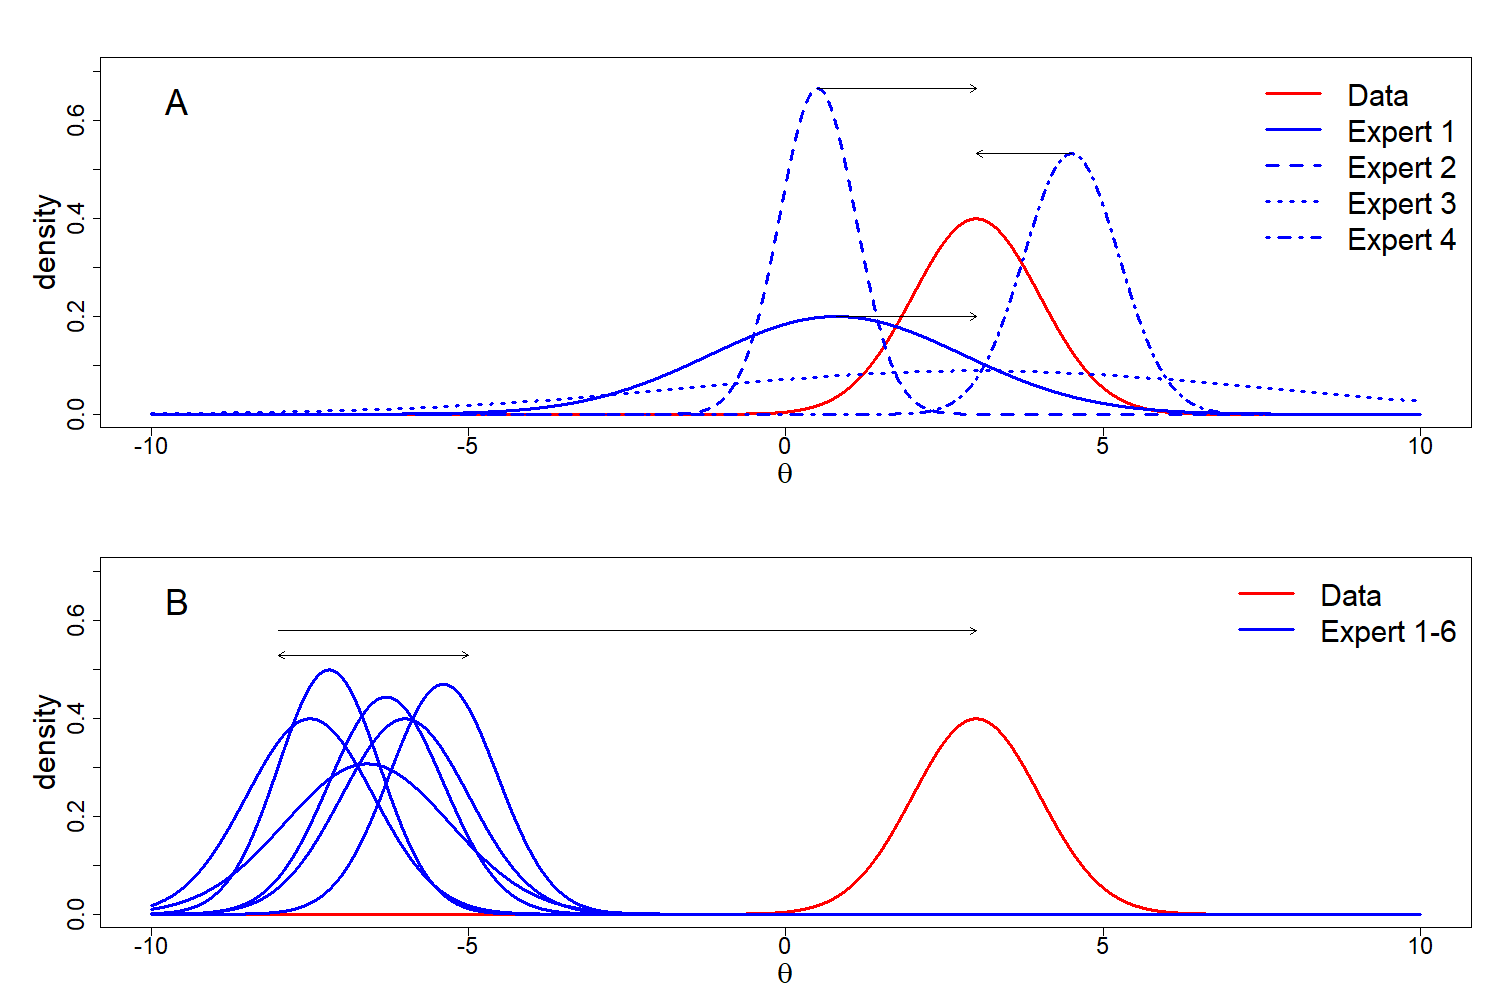 Scenarios in which there are multiple experts and one source of data. (A) shows experts differing in prediction and (un)certainty, all (dis)agreeing to a certain extent with the data; (B) shows a scenario in which all experts disagree with the data, which results in the question of which of the sources of information is correct.